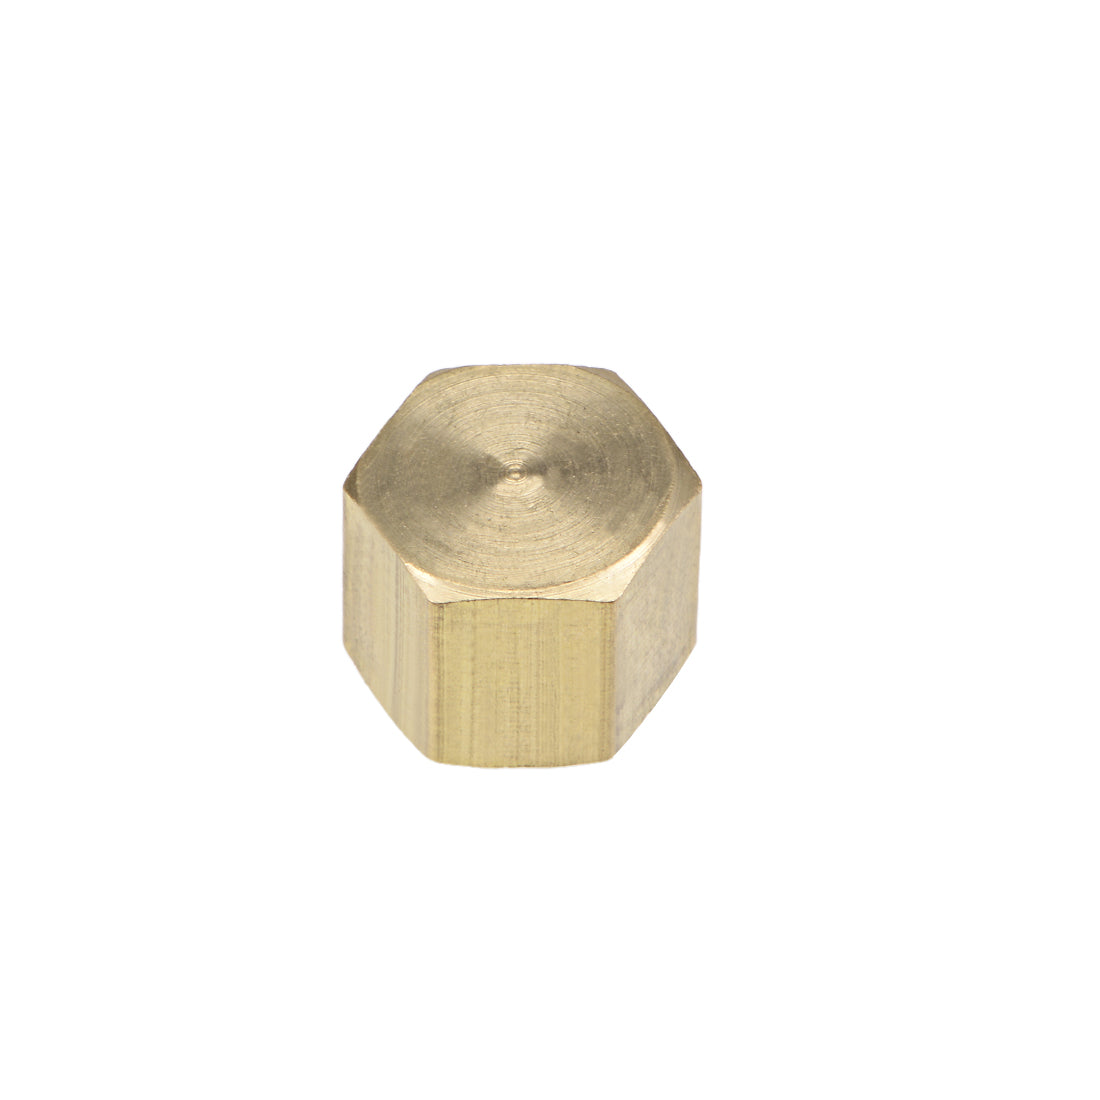 uxcell Uxcell 1/8 Inch Brass Cap 10pcs PT1/8 Female Pipe Fitting Hex Compression Stop Valve Connector 11x11mm